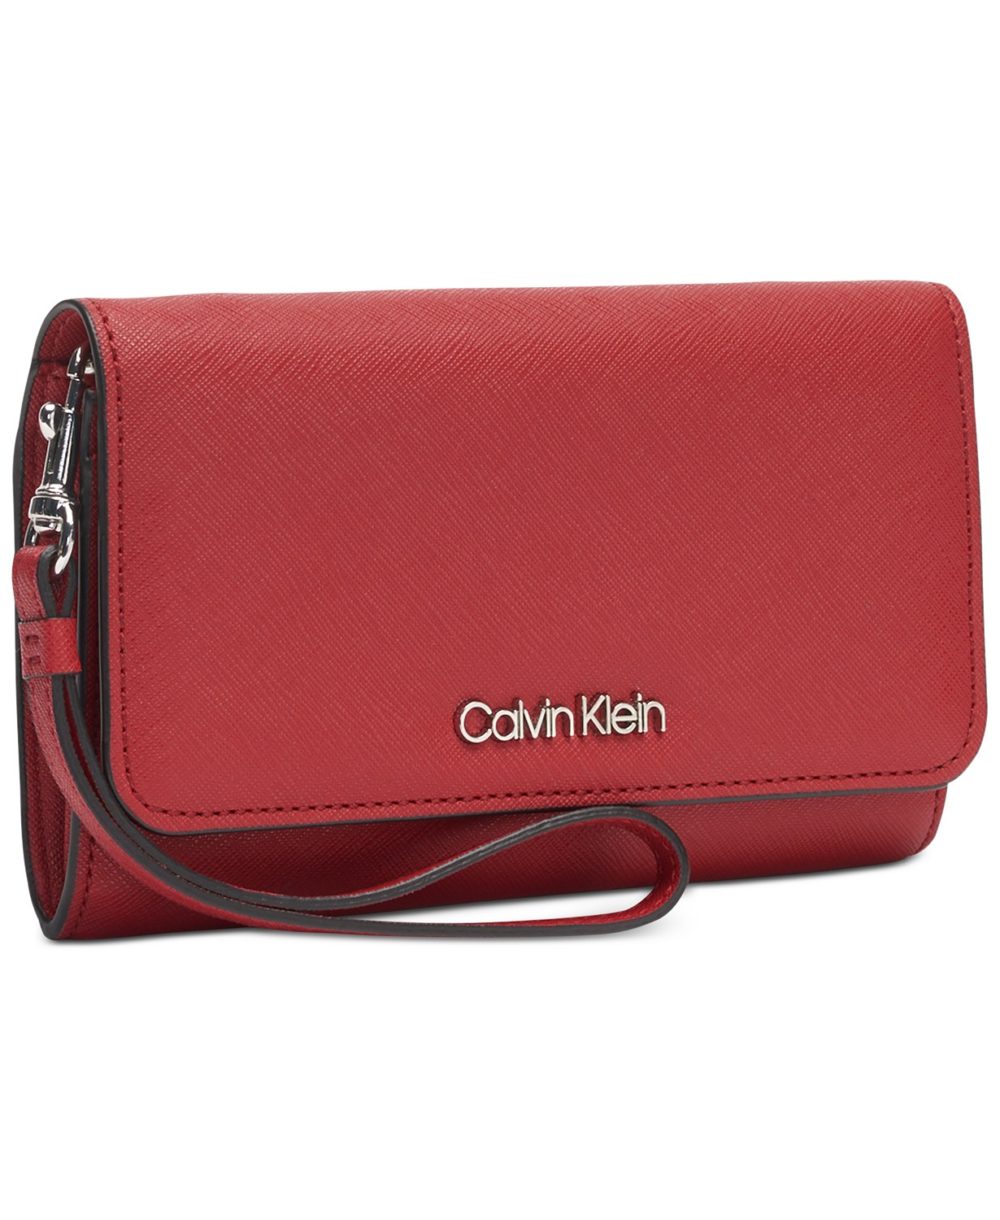 www.couturepoint.com-calvin-klein-womens-red-saffiano-leather-wristlet-wallet